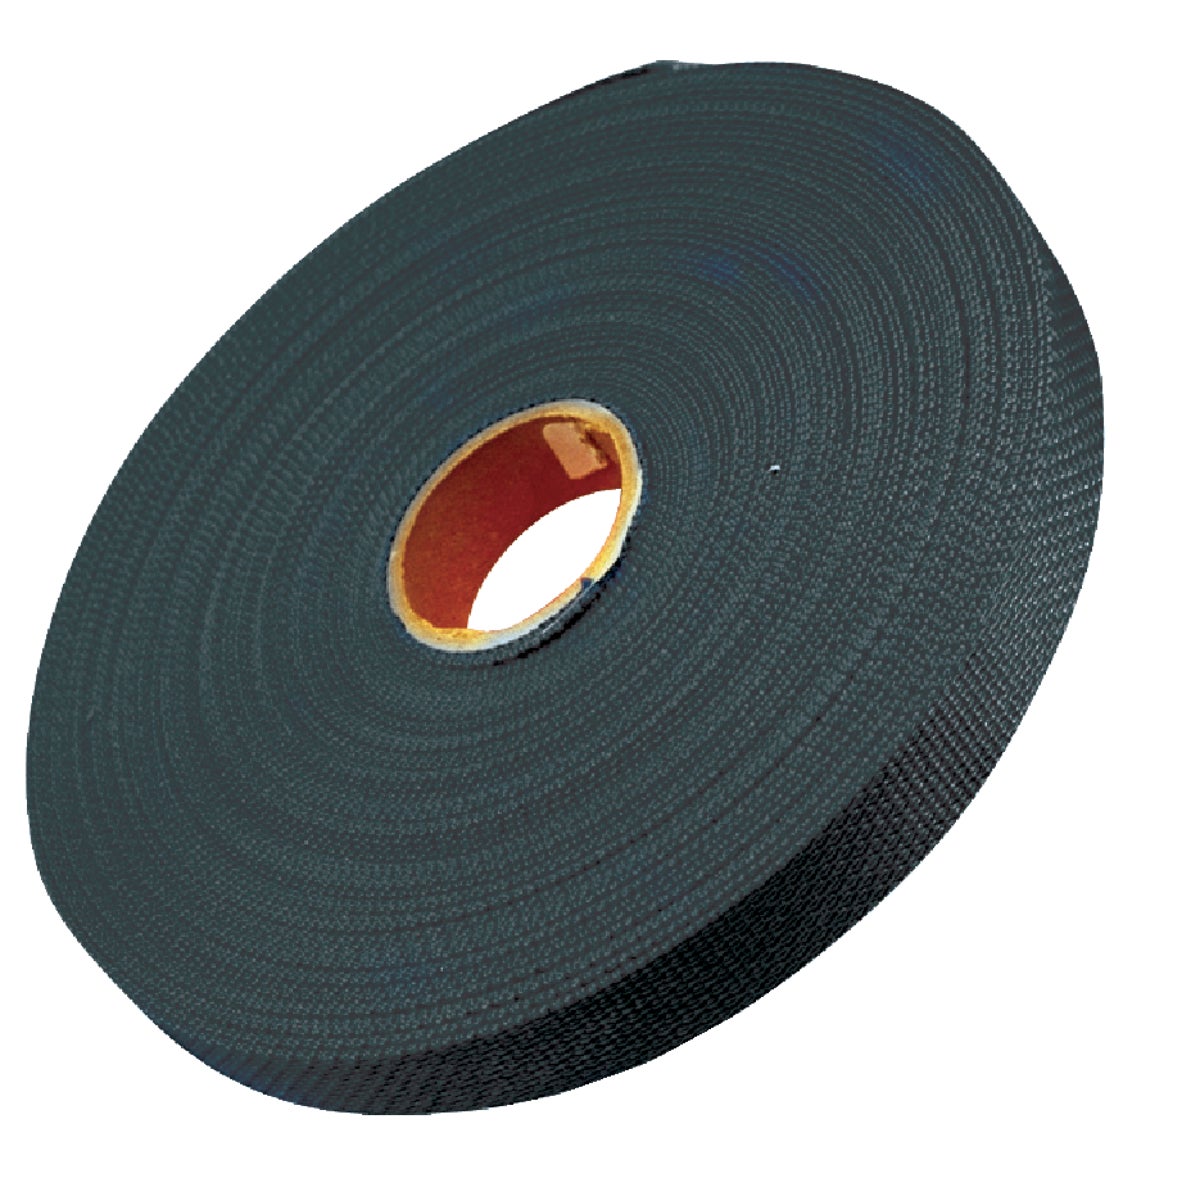 Item 584630, Polypropylene strapping for lightweight applications.